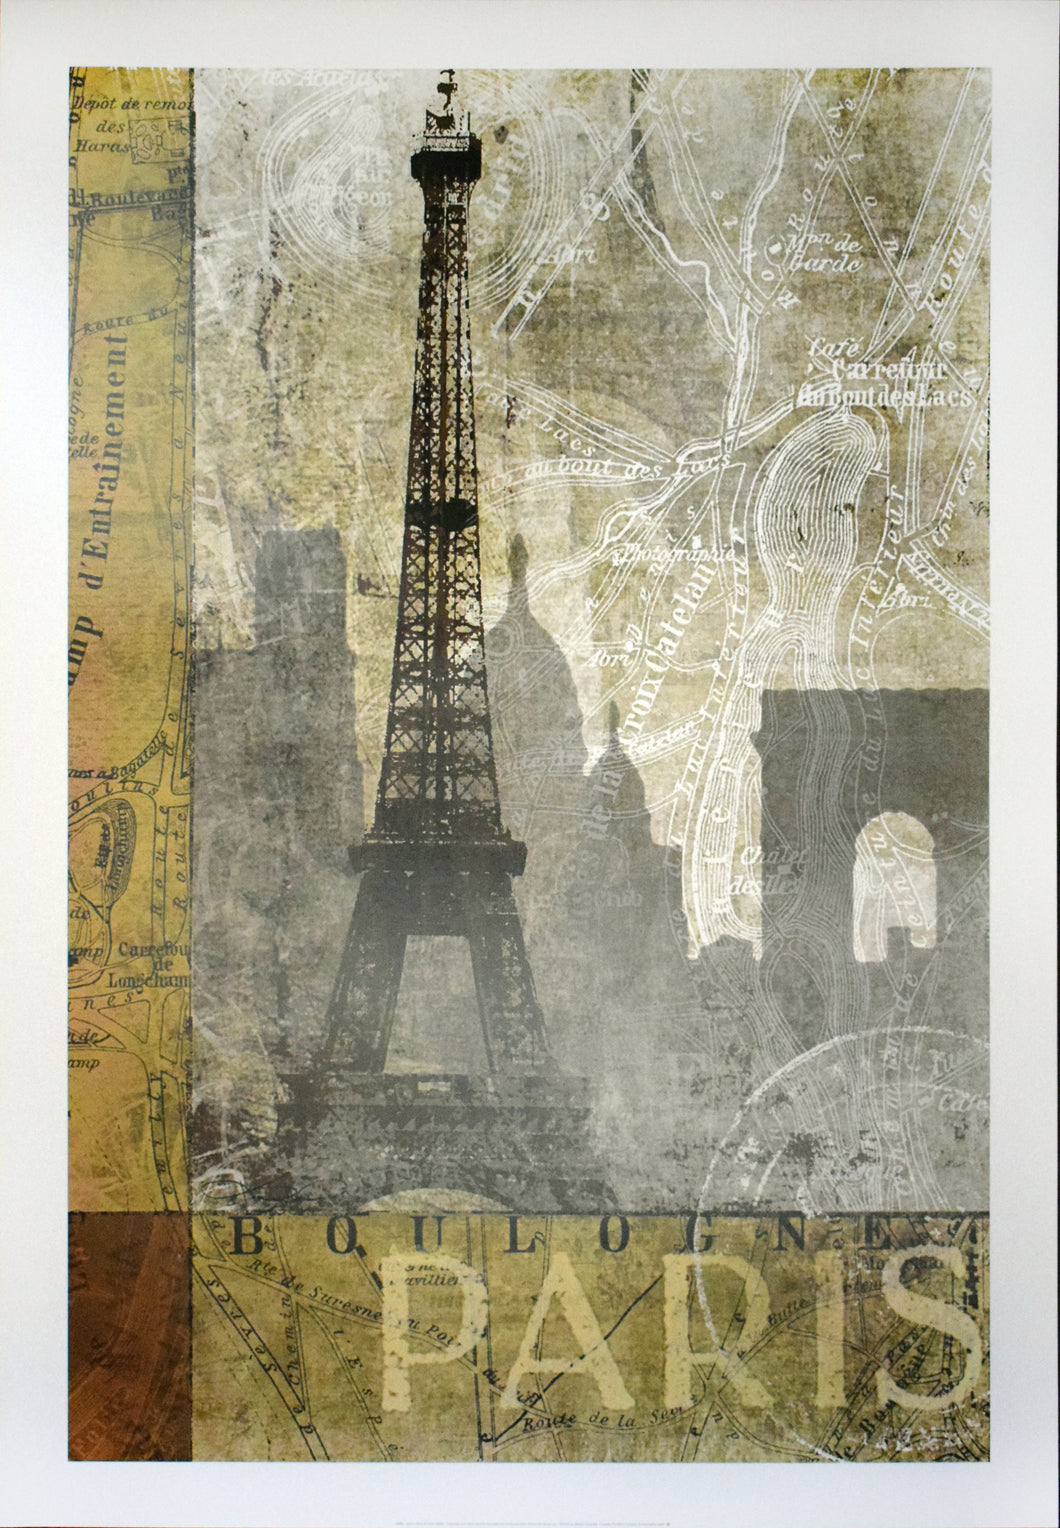 This is a picture of the eiffel tower in paris. The color scheme is browns and reds in a nuetral tone palette. There is a transparent map overlaying the eiffel tower, below the tower it says Paris in all capital letters. Behind the Eiffel tower is a silhouette of Paris. 